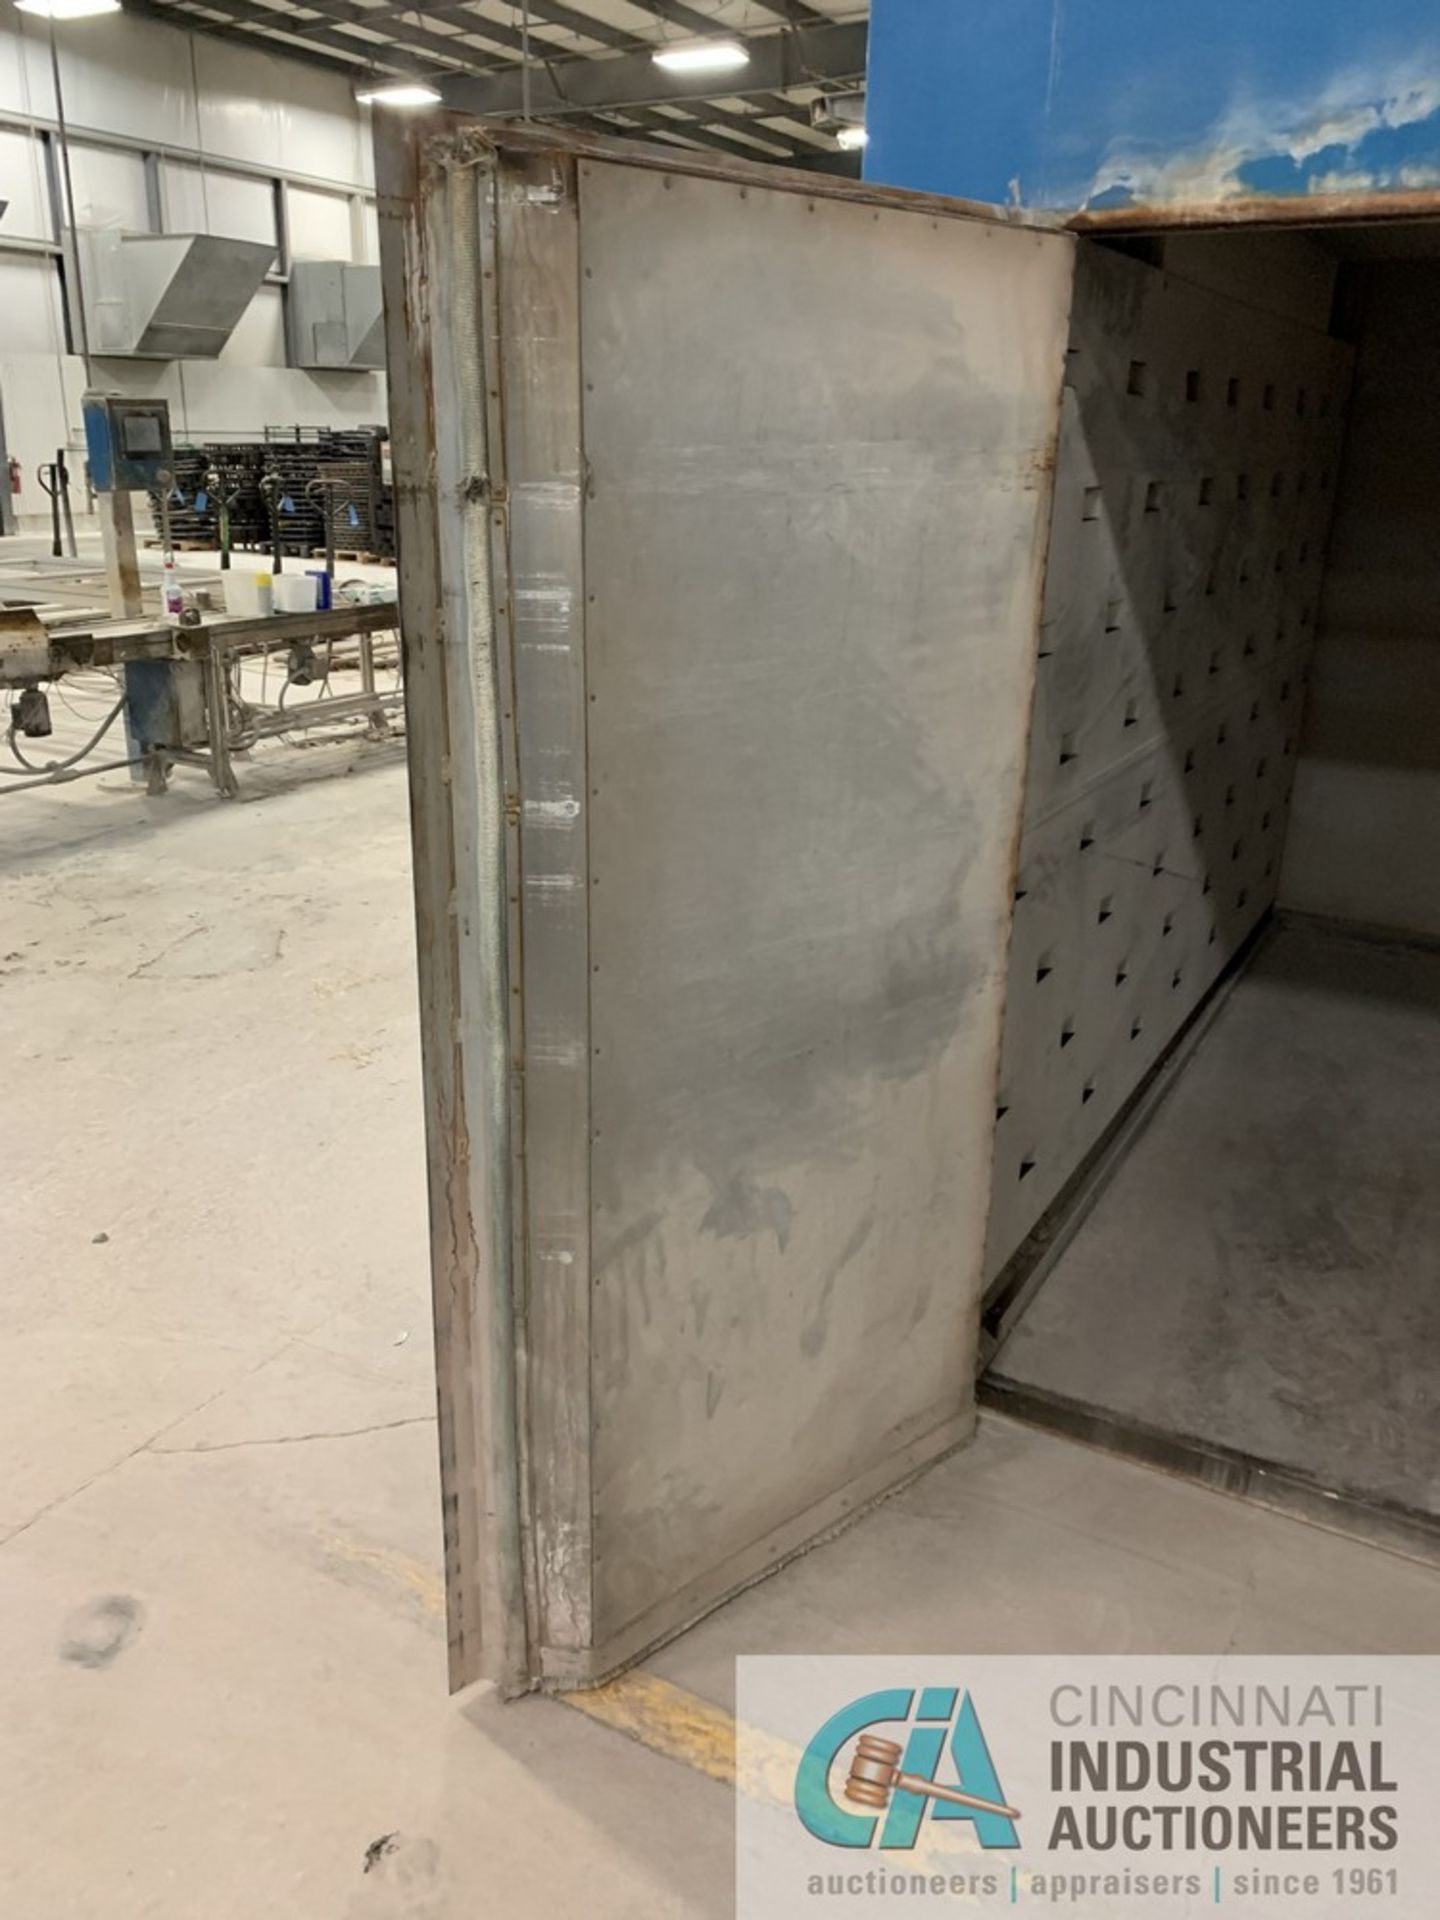 6' X 10' X 6' WISCONSIN OVEN MODEL SWN-610-6E ELECTRIC BATCH OVEN; S/N 112670808, 500 DEGREE, - Image 15 of 15